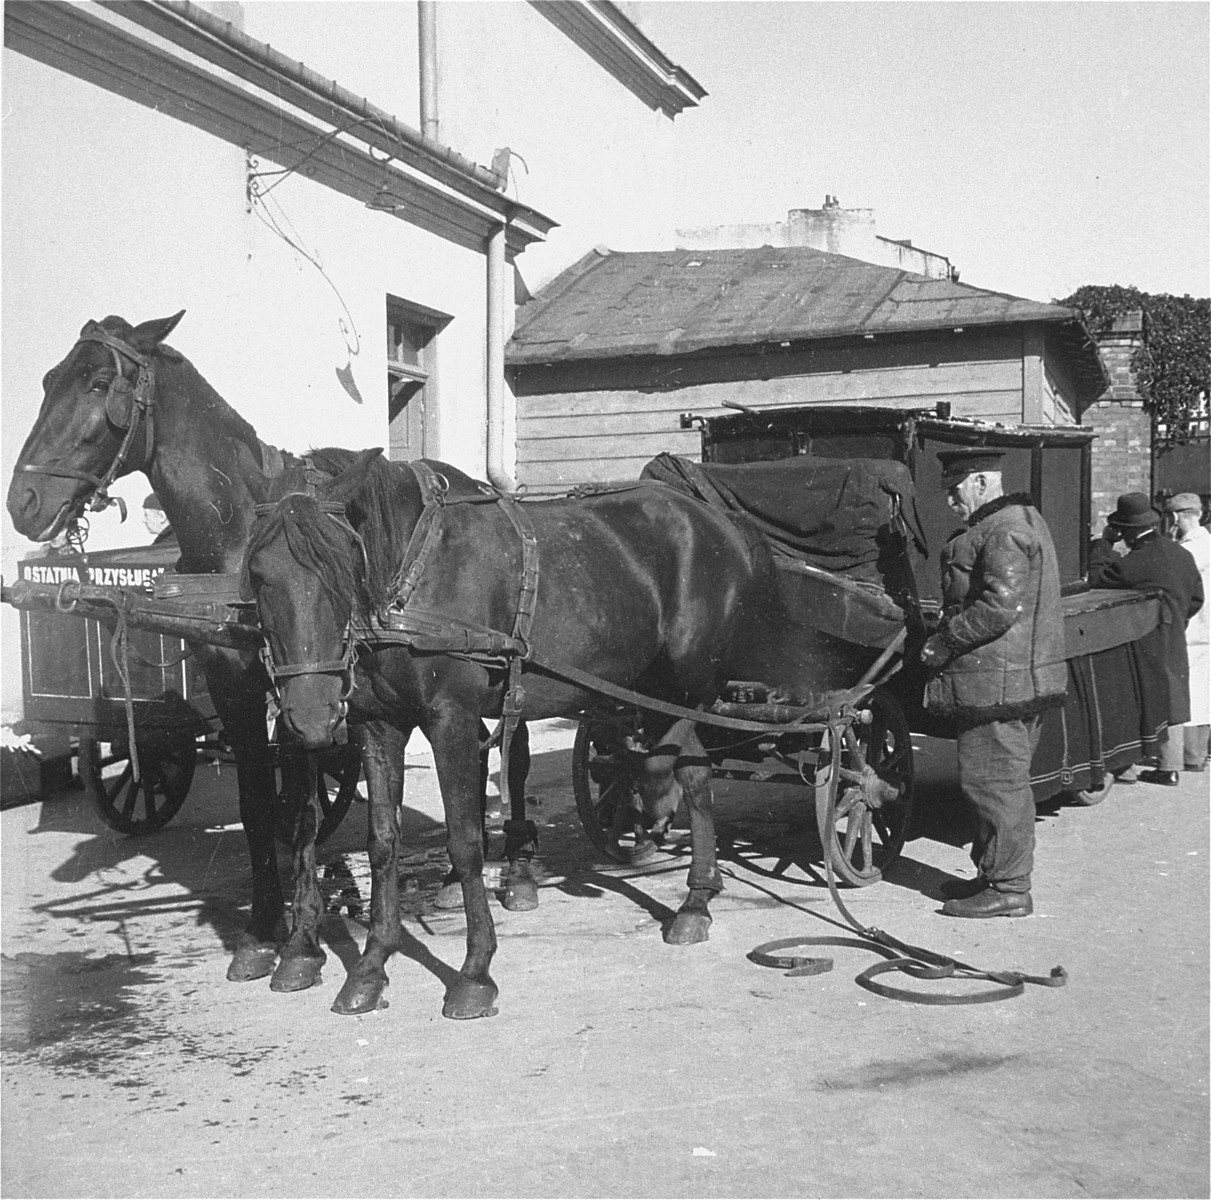 An undertaker from the Pinkiert funeral home adjusts the harness on his horse before leading a funeral procession.